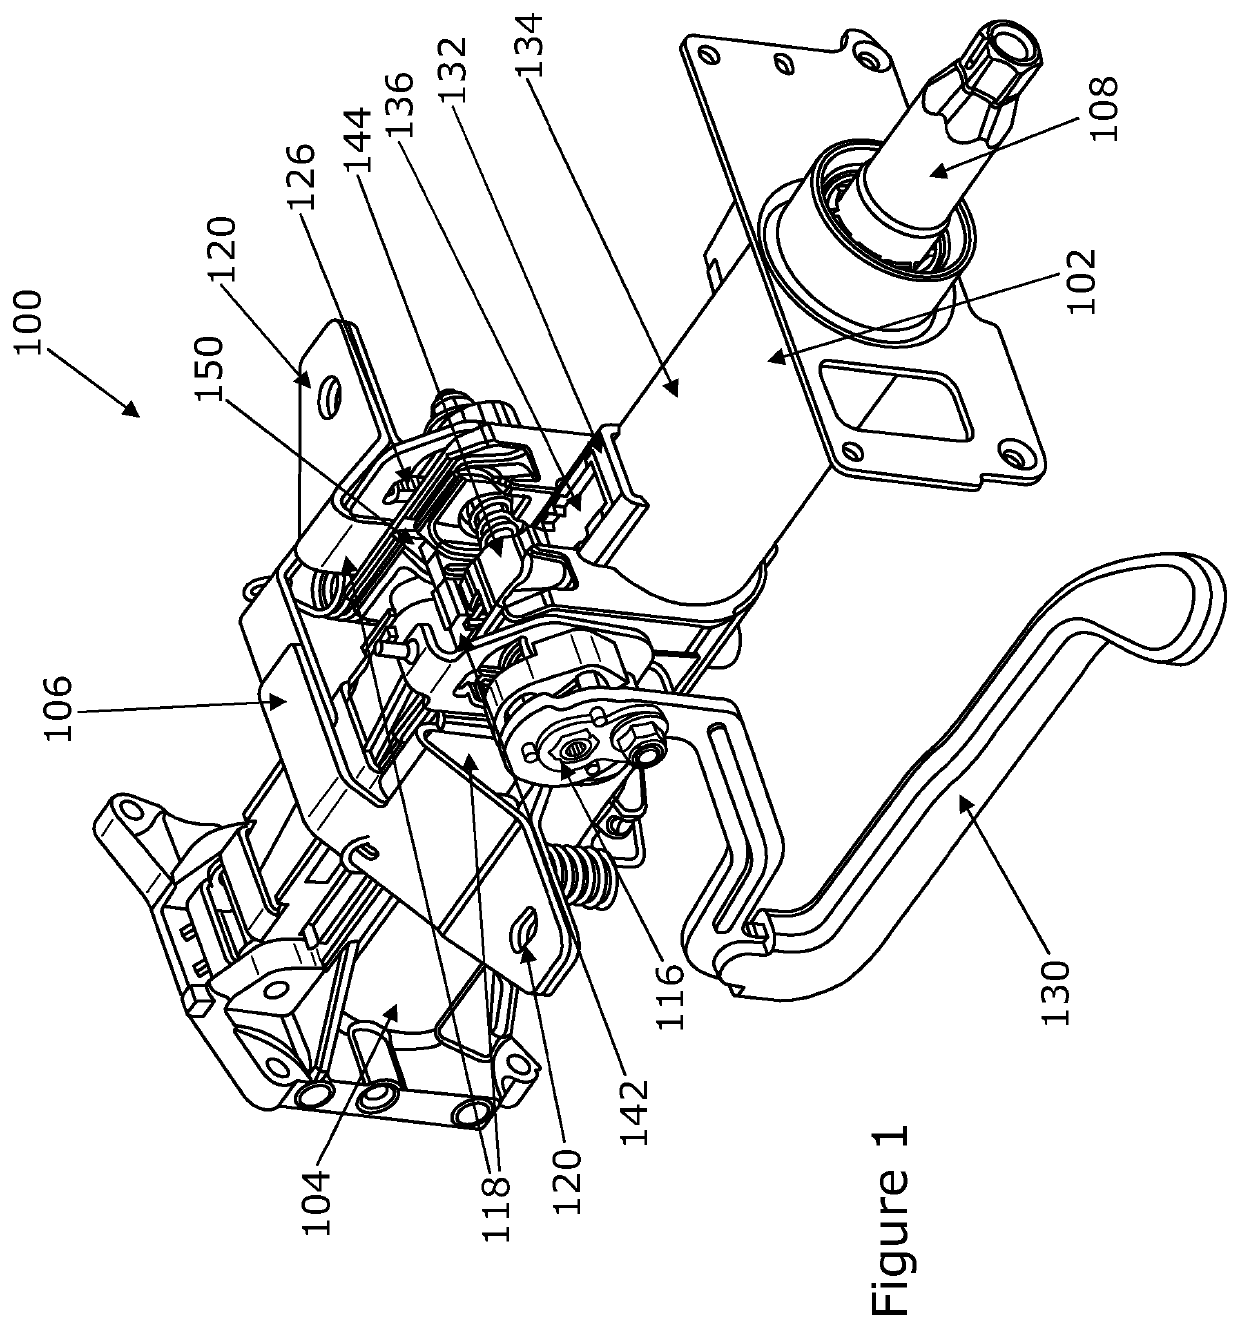 A steering column assembly